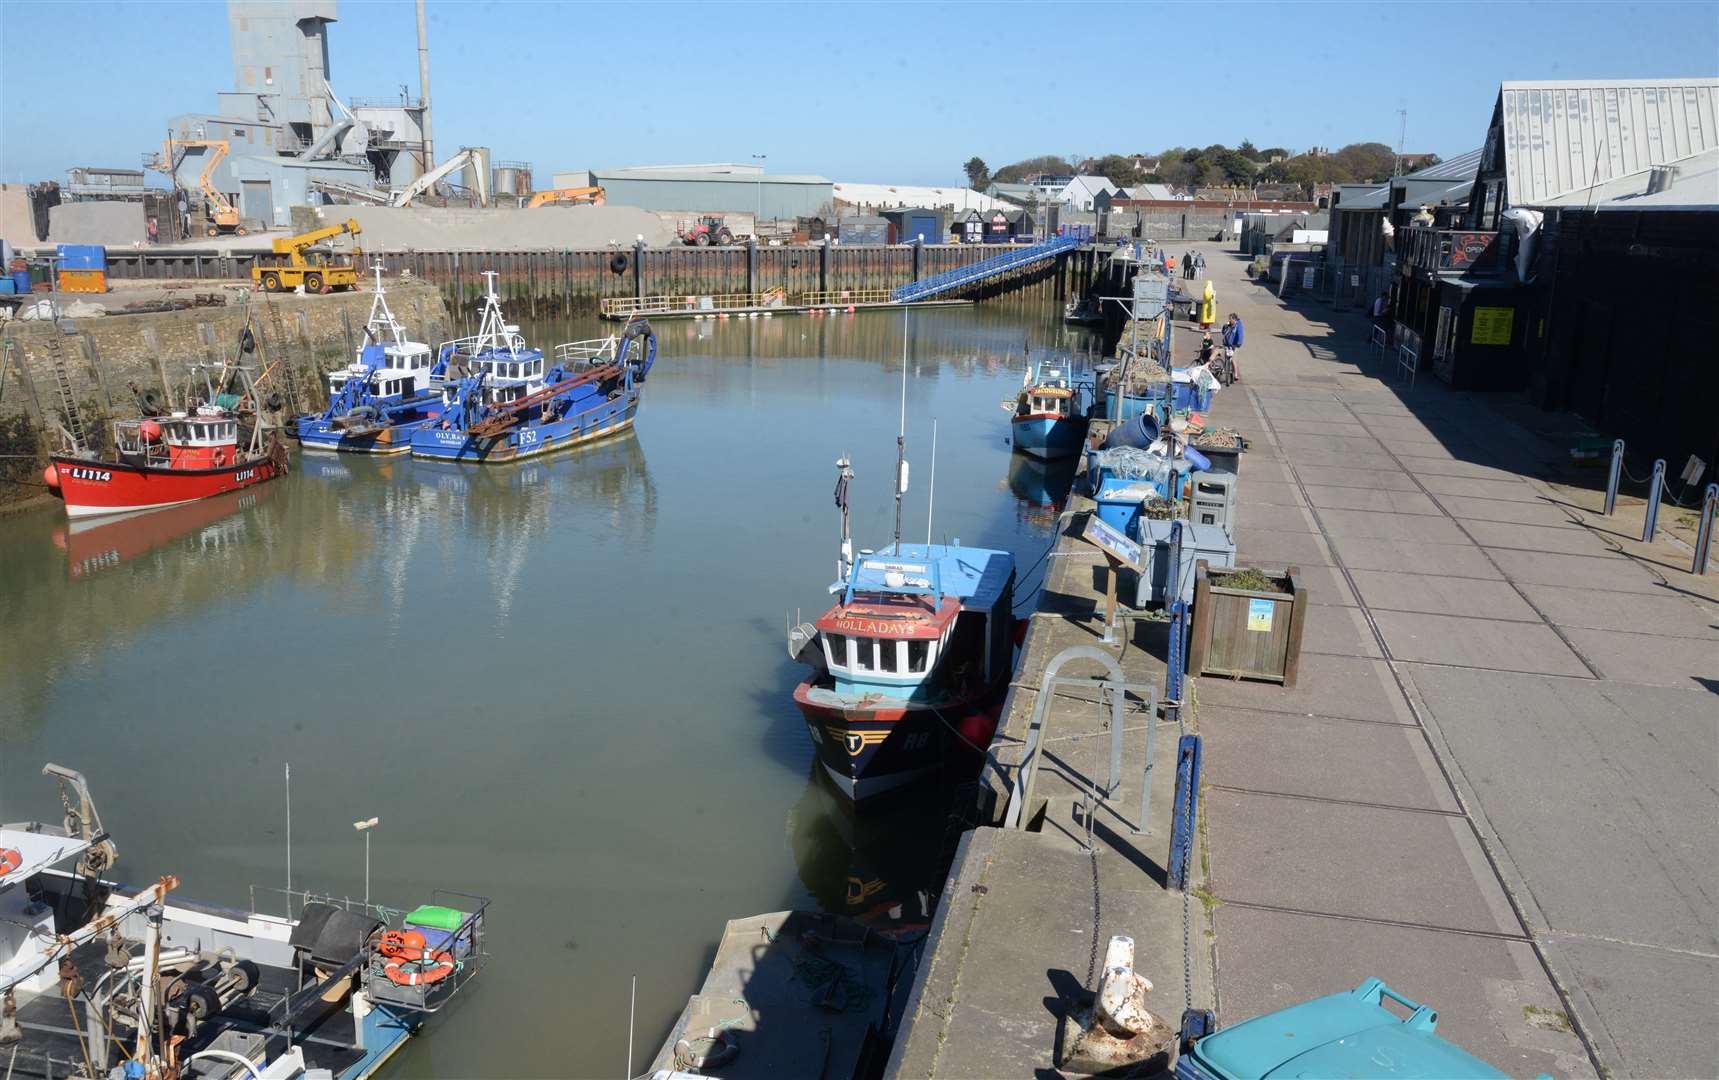 It is hoped visitors will stay away from Whitstable Harbour and other tourist hotspots this Easter weekend. Picture: Chris Davey